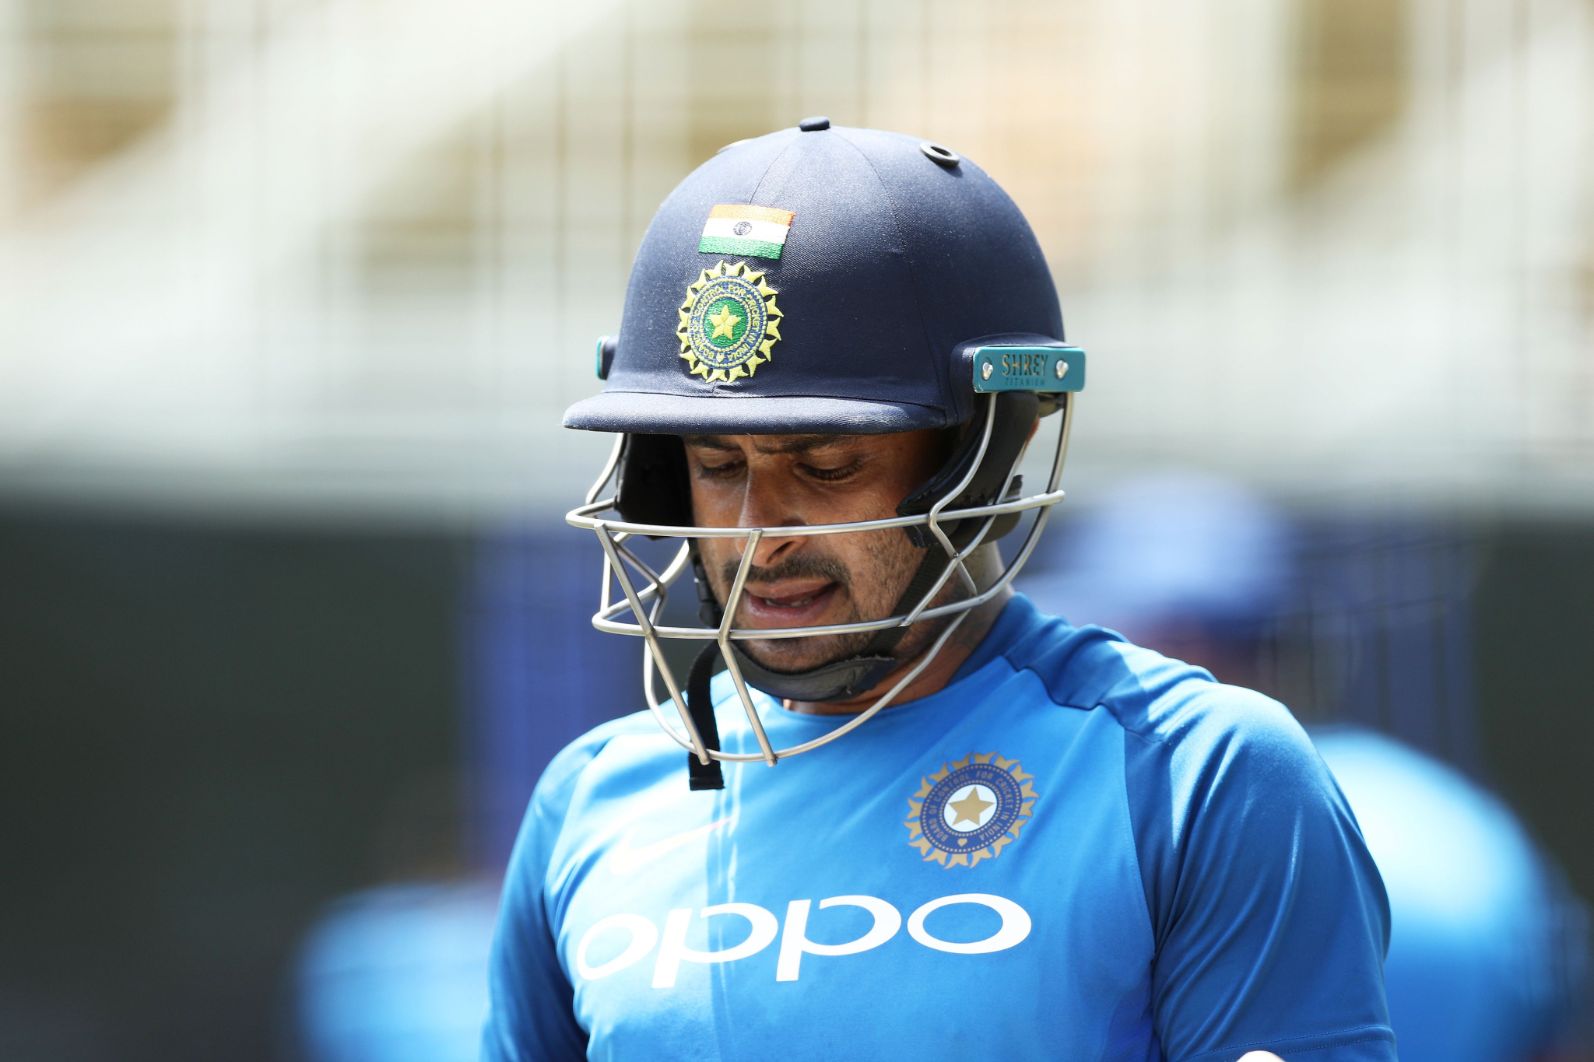 In good shape and fitness, Ambati Rayudu intends to play on for at least three more years